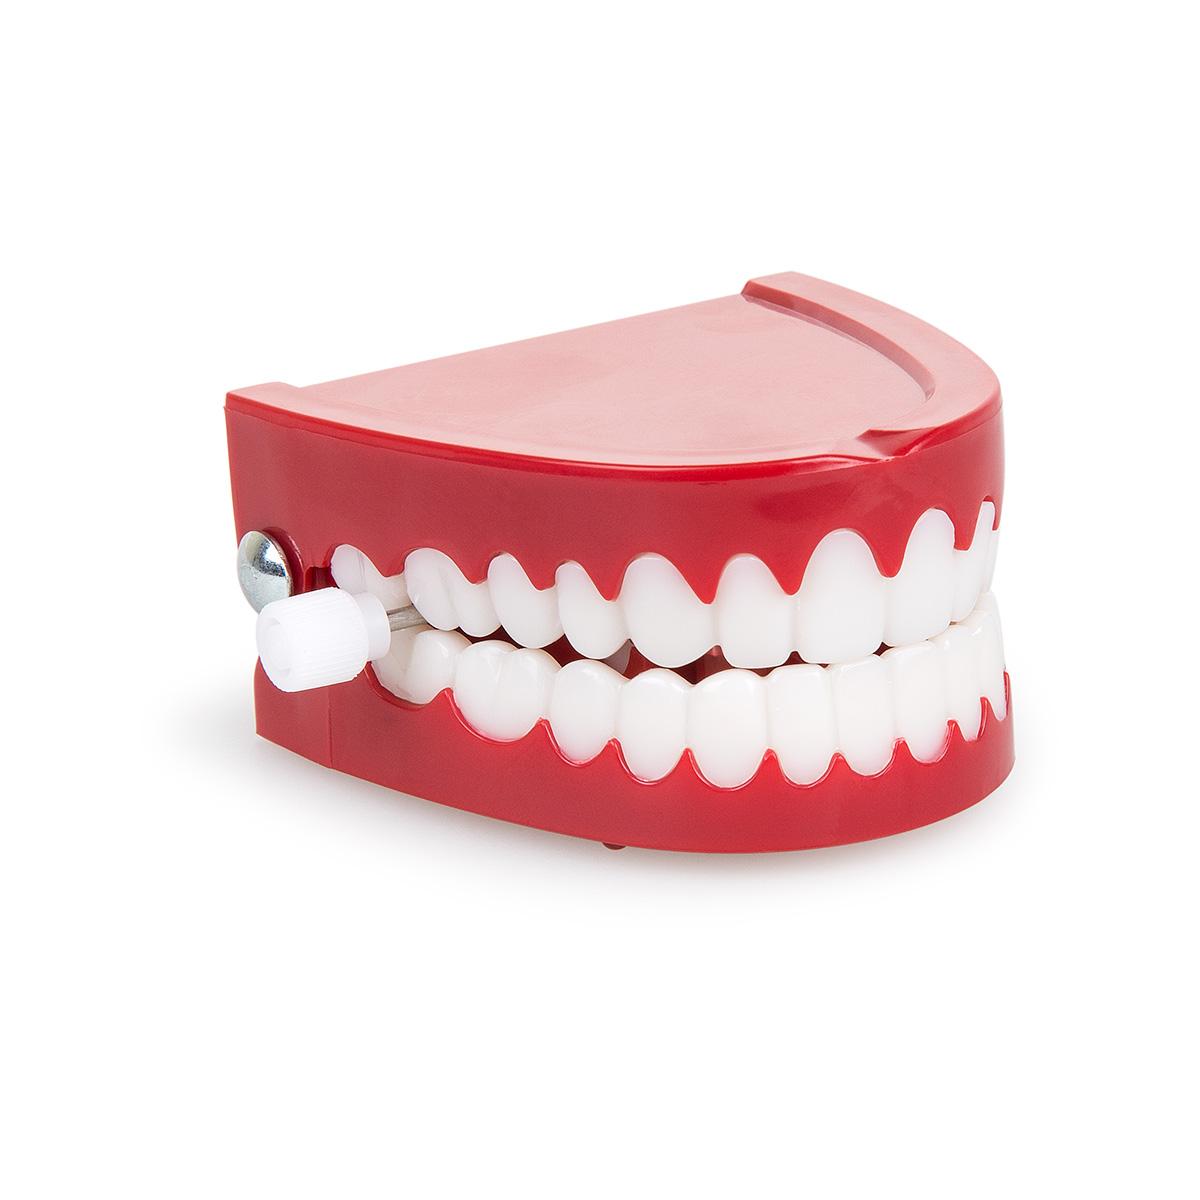 Chattering Teeth by Toysmith wind up dentures yakity yak classic novelty toy for sale online